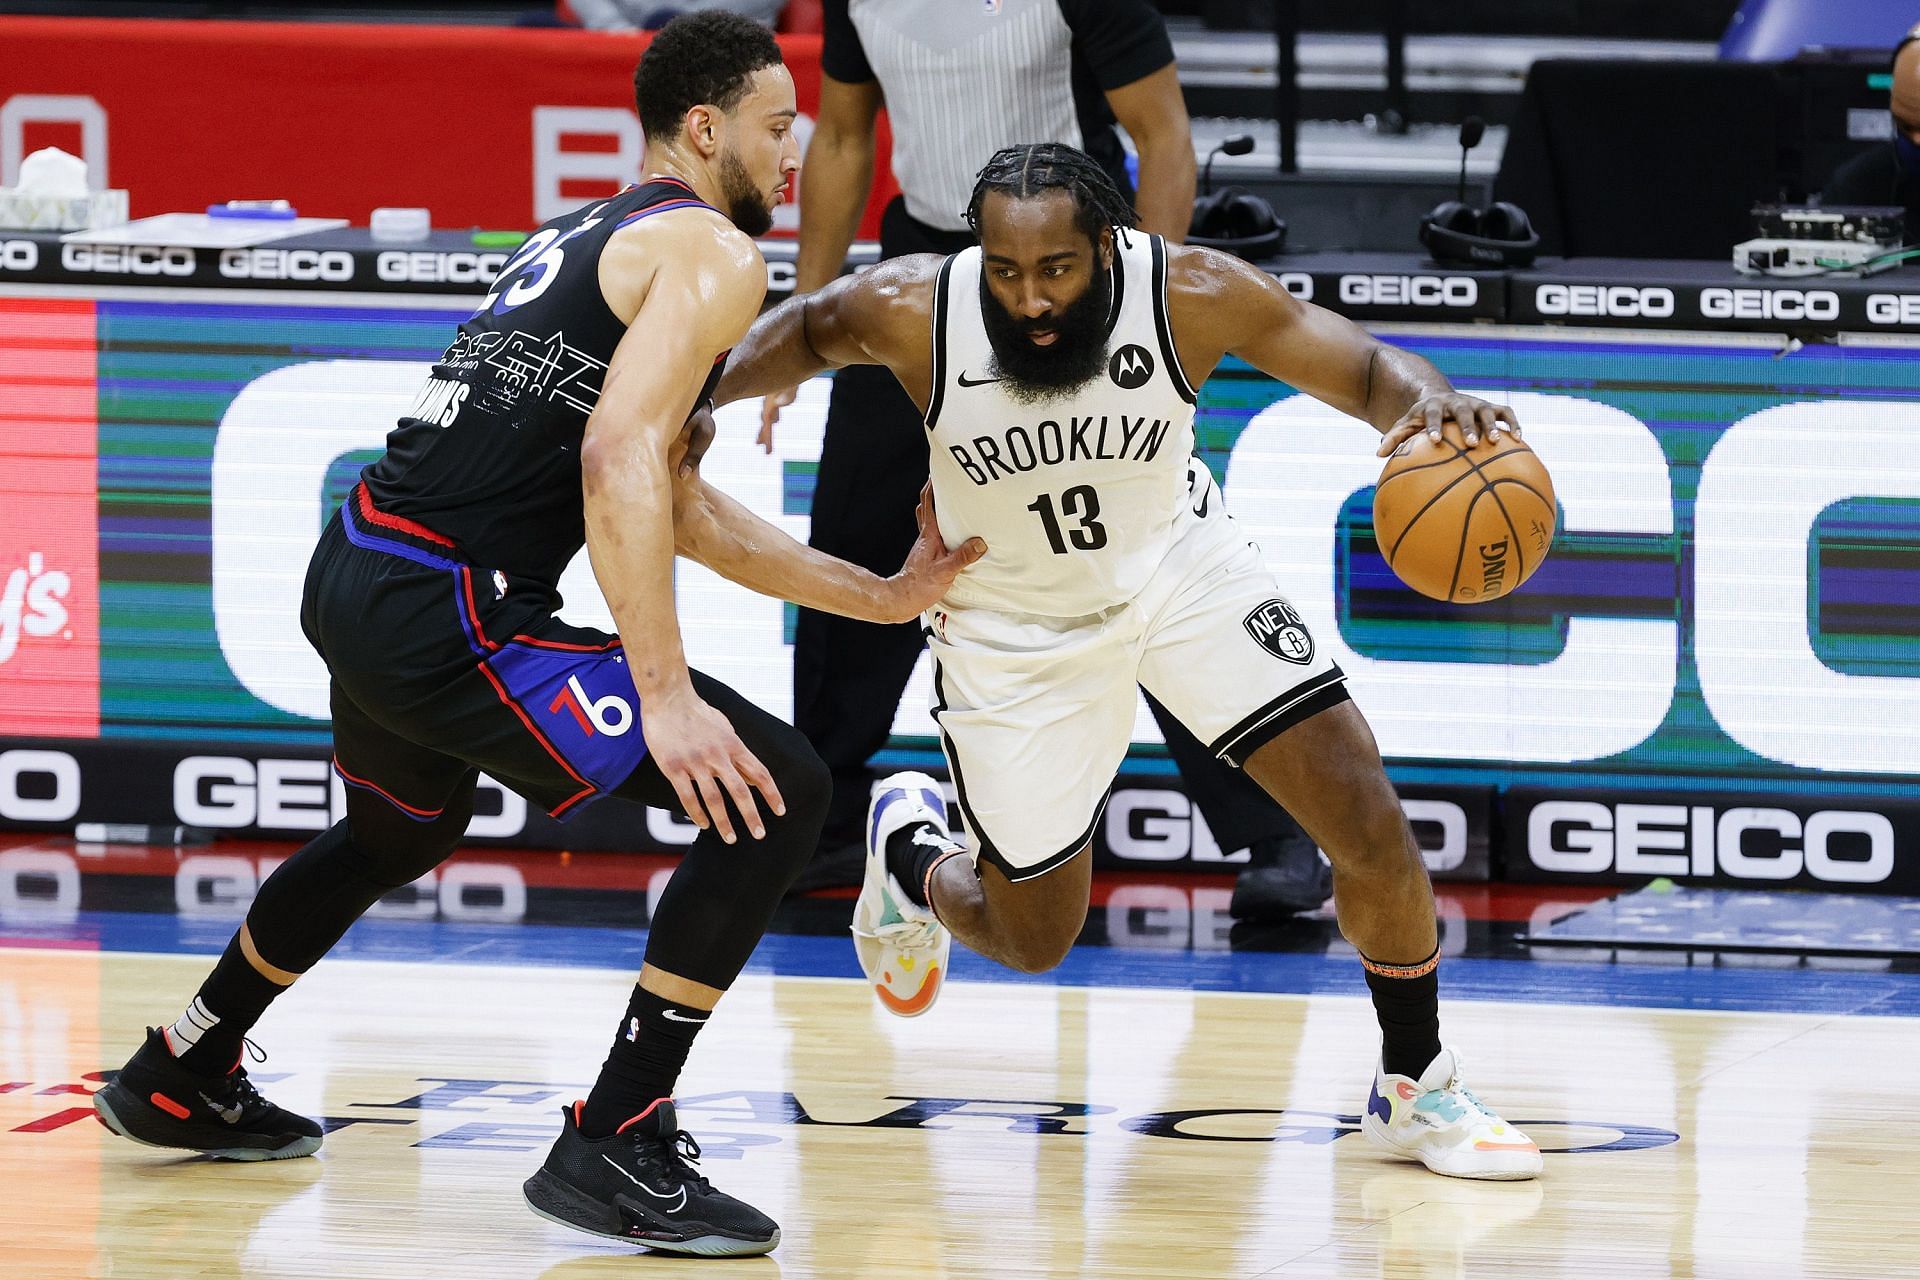 The Philadelphia 76ers could opt to use Ben Simmons to acquire James Harden next season